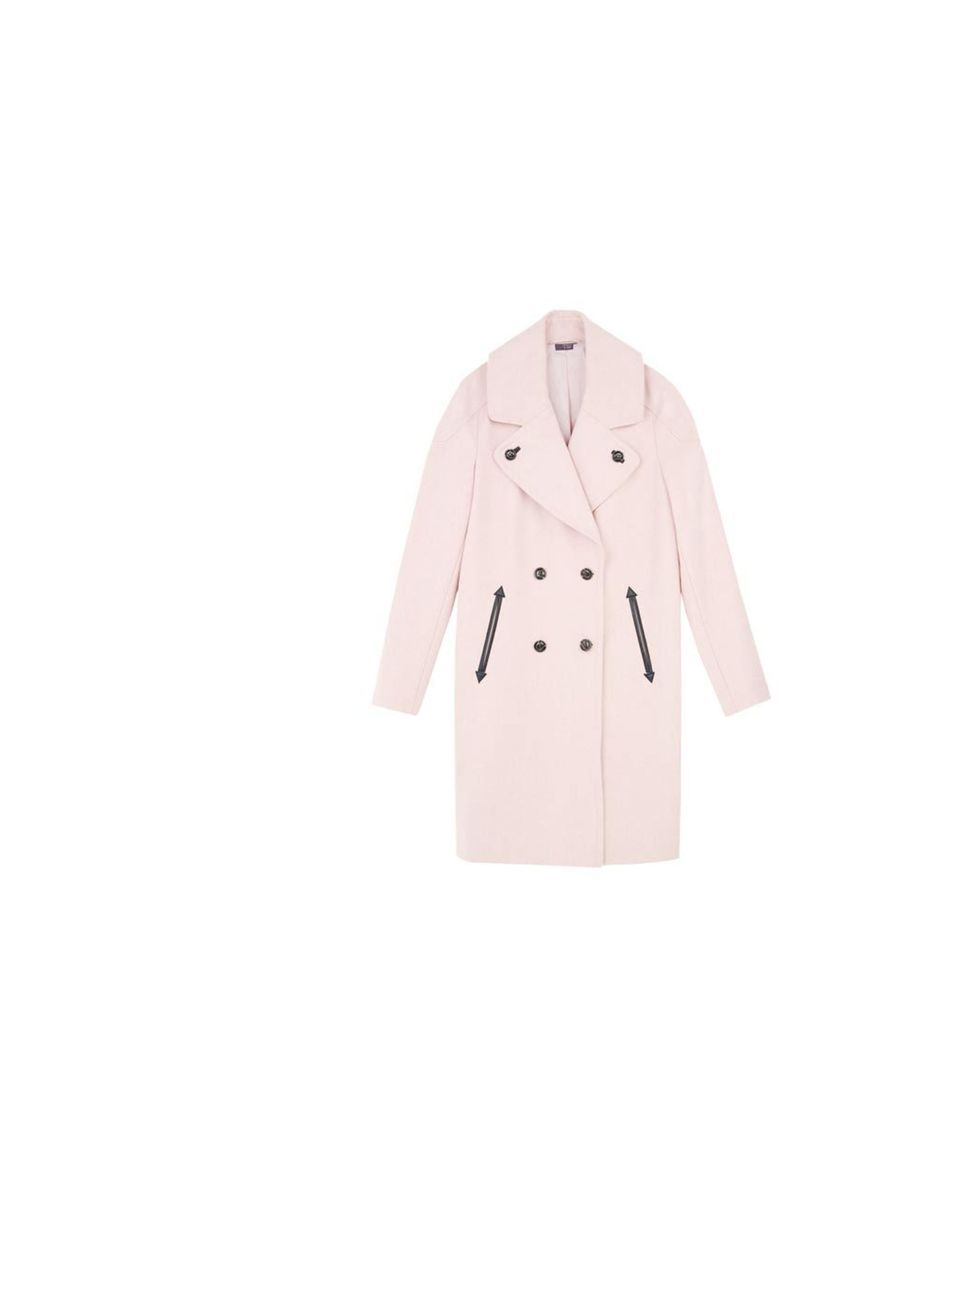 <p>Sparkle &amp; Fade overcoat, £125, at <a href="http://www.urbanoutfitters.co.uk/sparkle+fade-overcoat/invt/5133472360051/">Urban Outfitters</a></p>